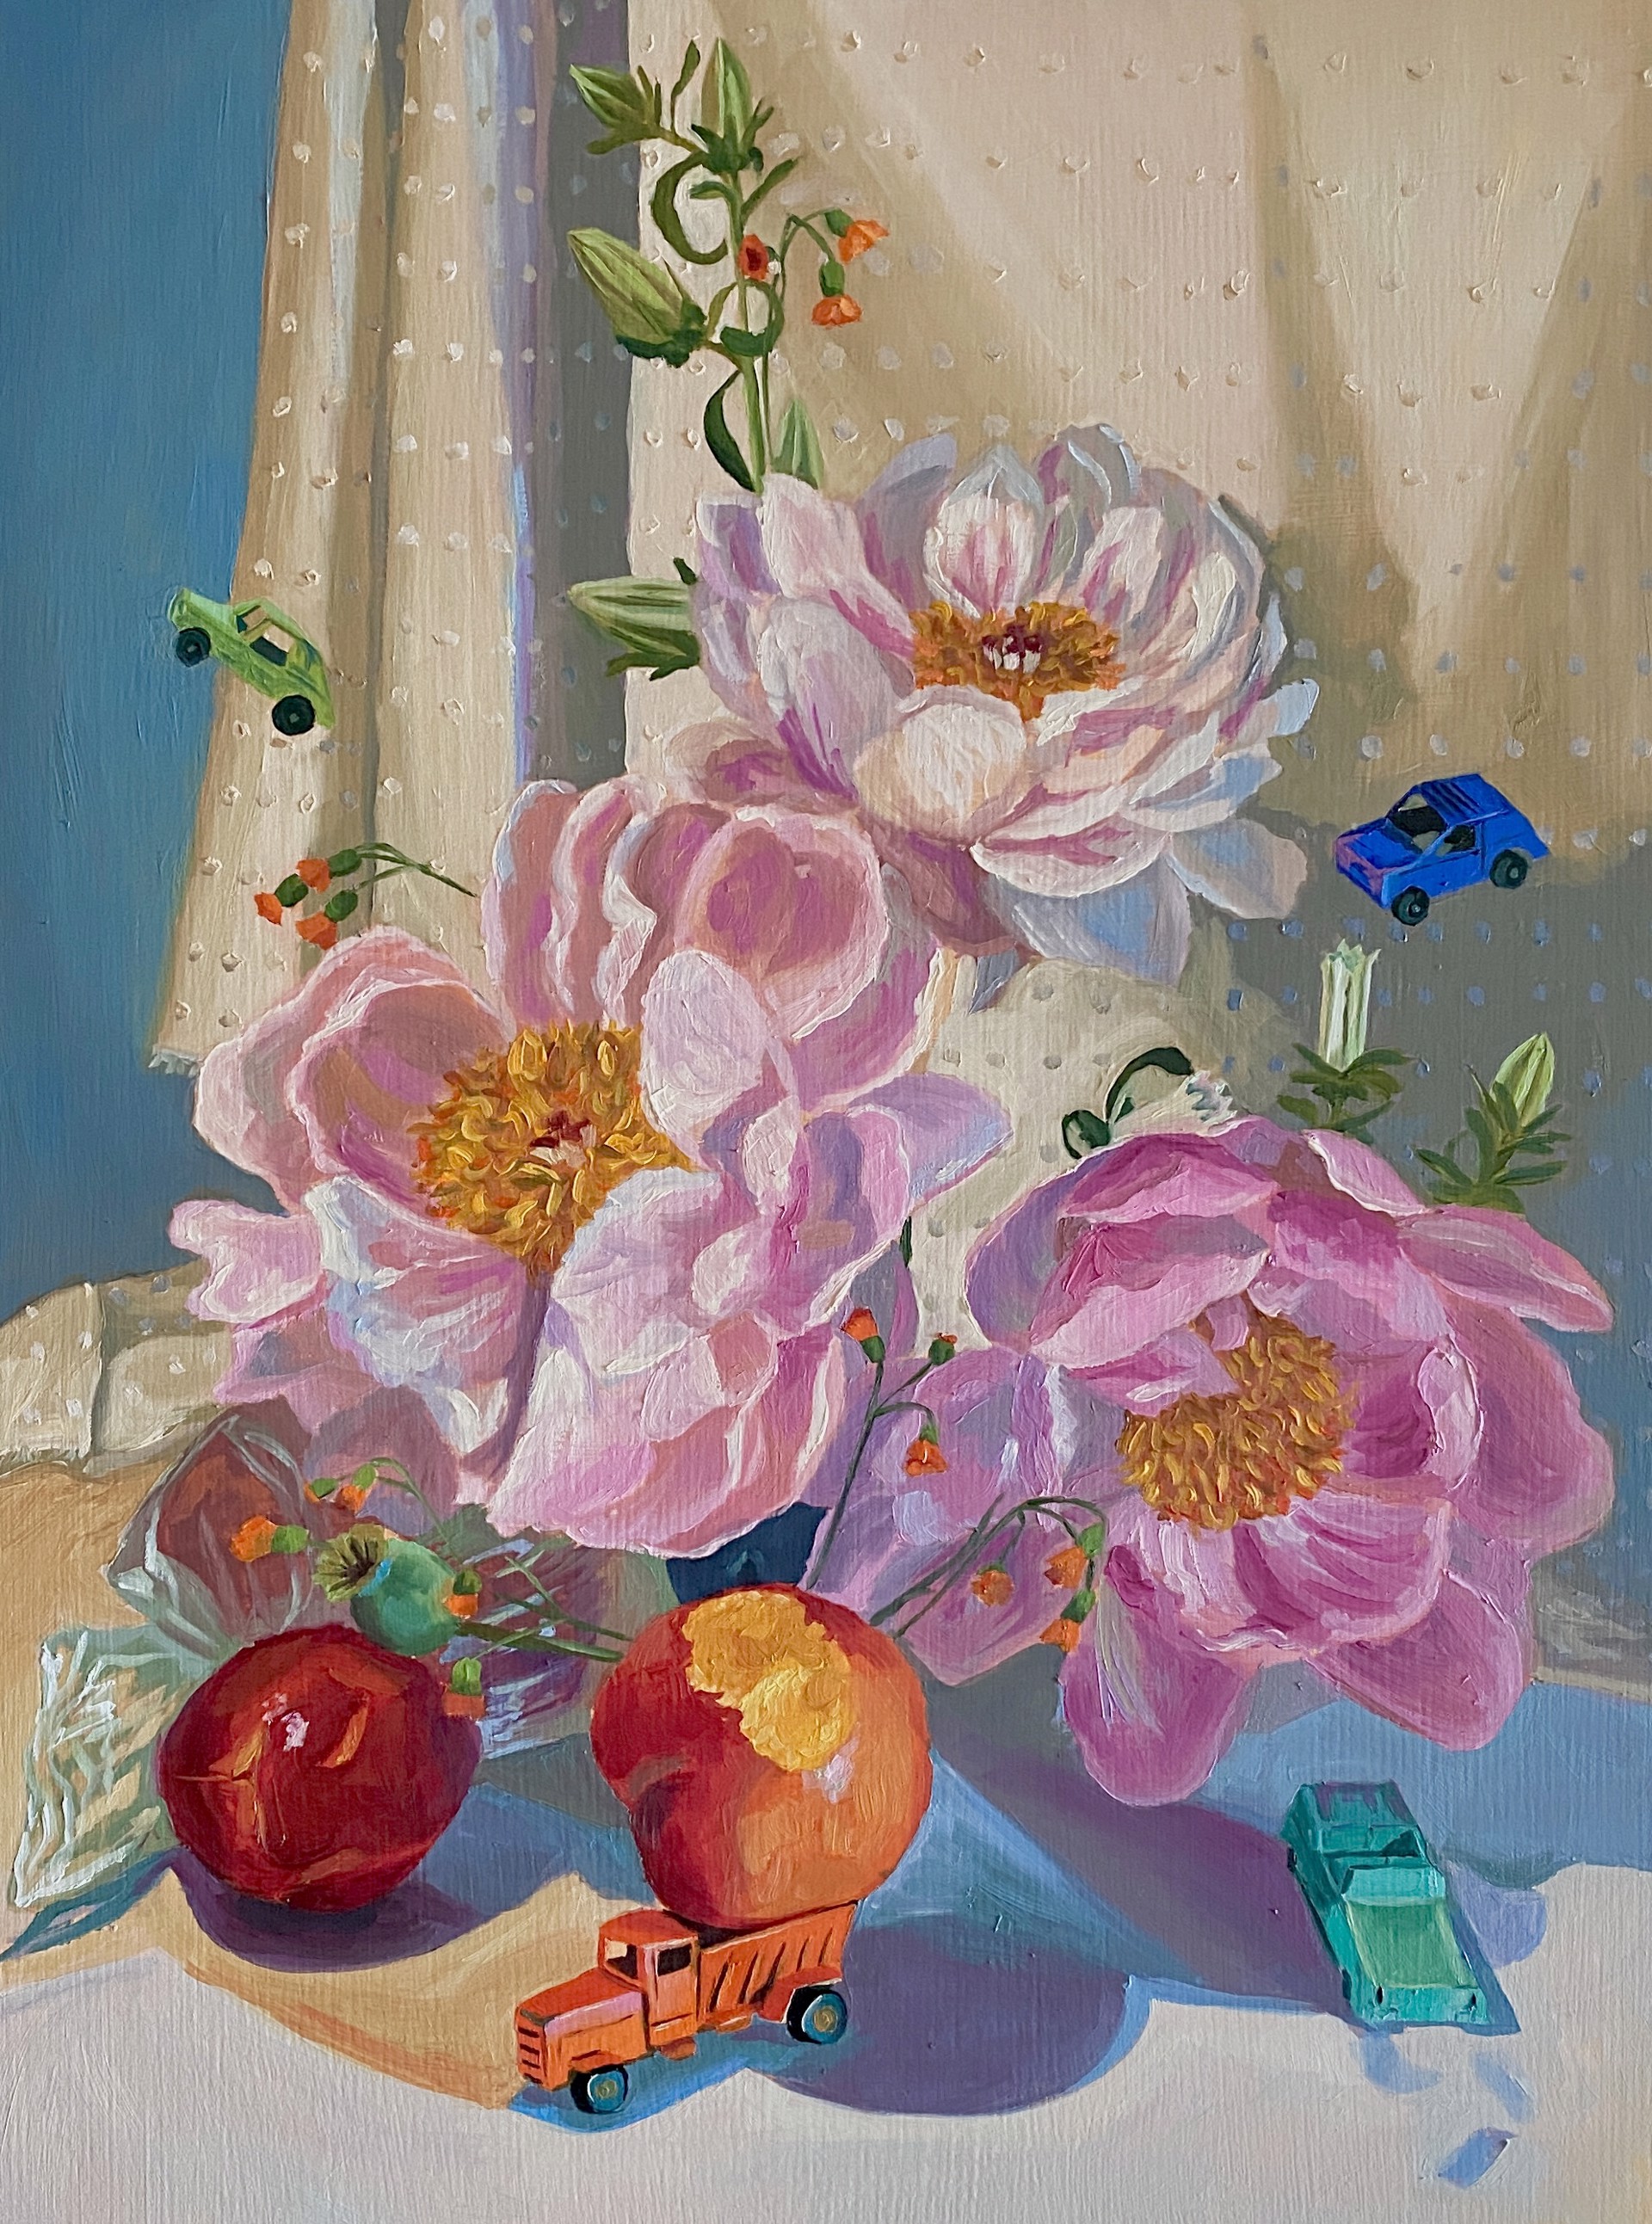 Small Cars and Giant Peonies by Bella Wattles